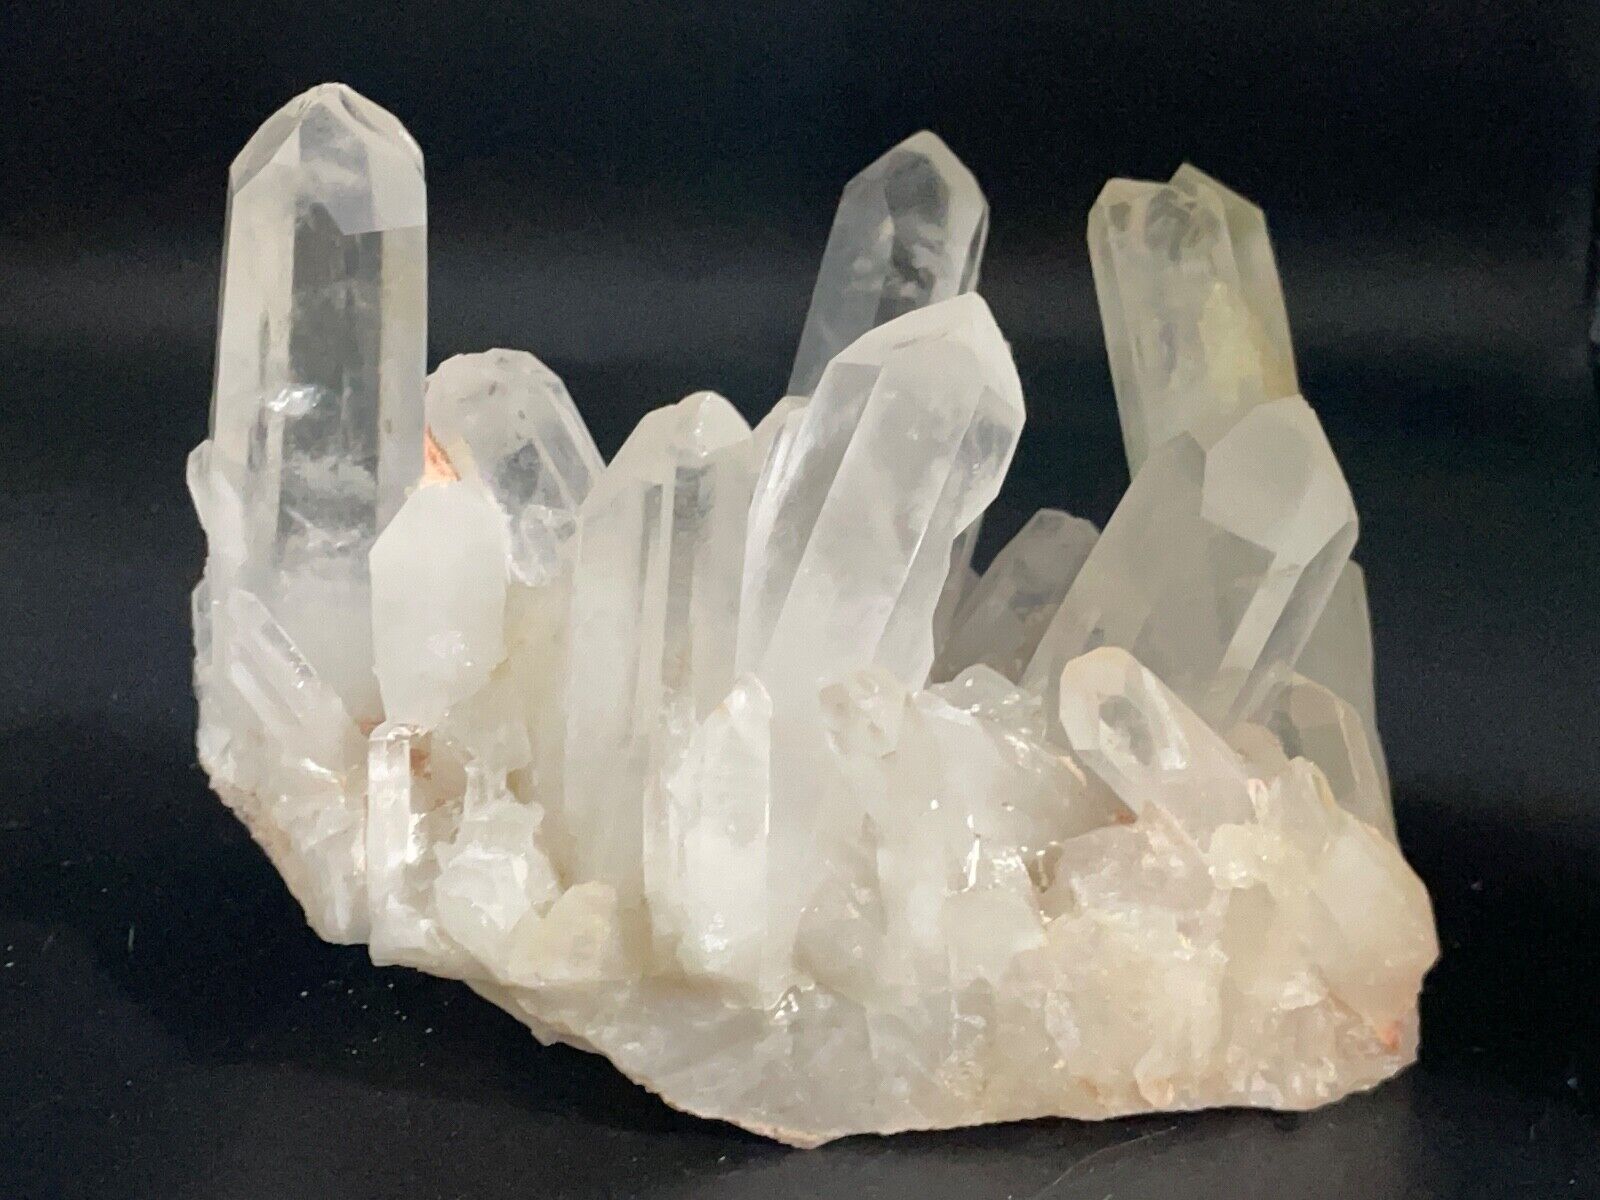 CLEAR LARGE CRYSTAL CLUSTER 796 GRAMS - GREAT DISPLAY PIECE FOR HOME OR OFFICE